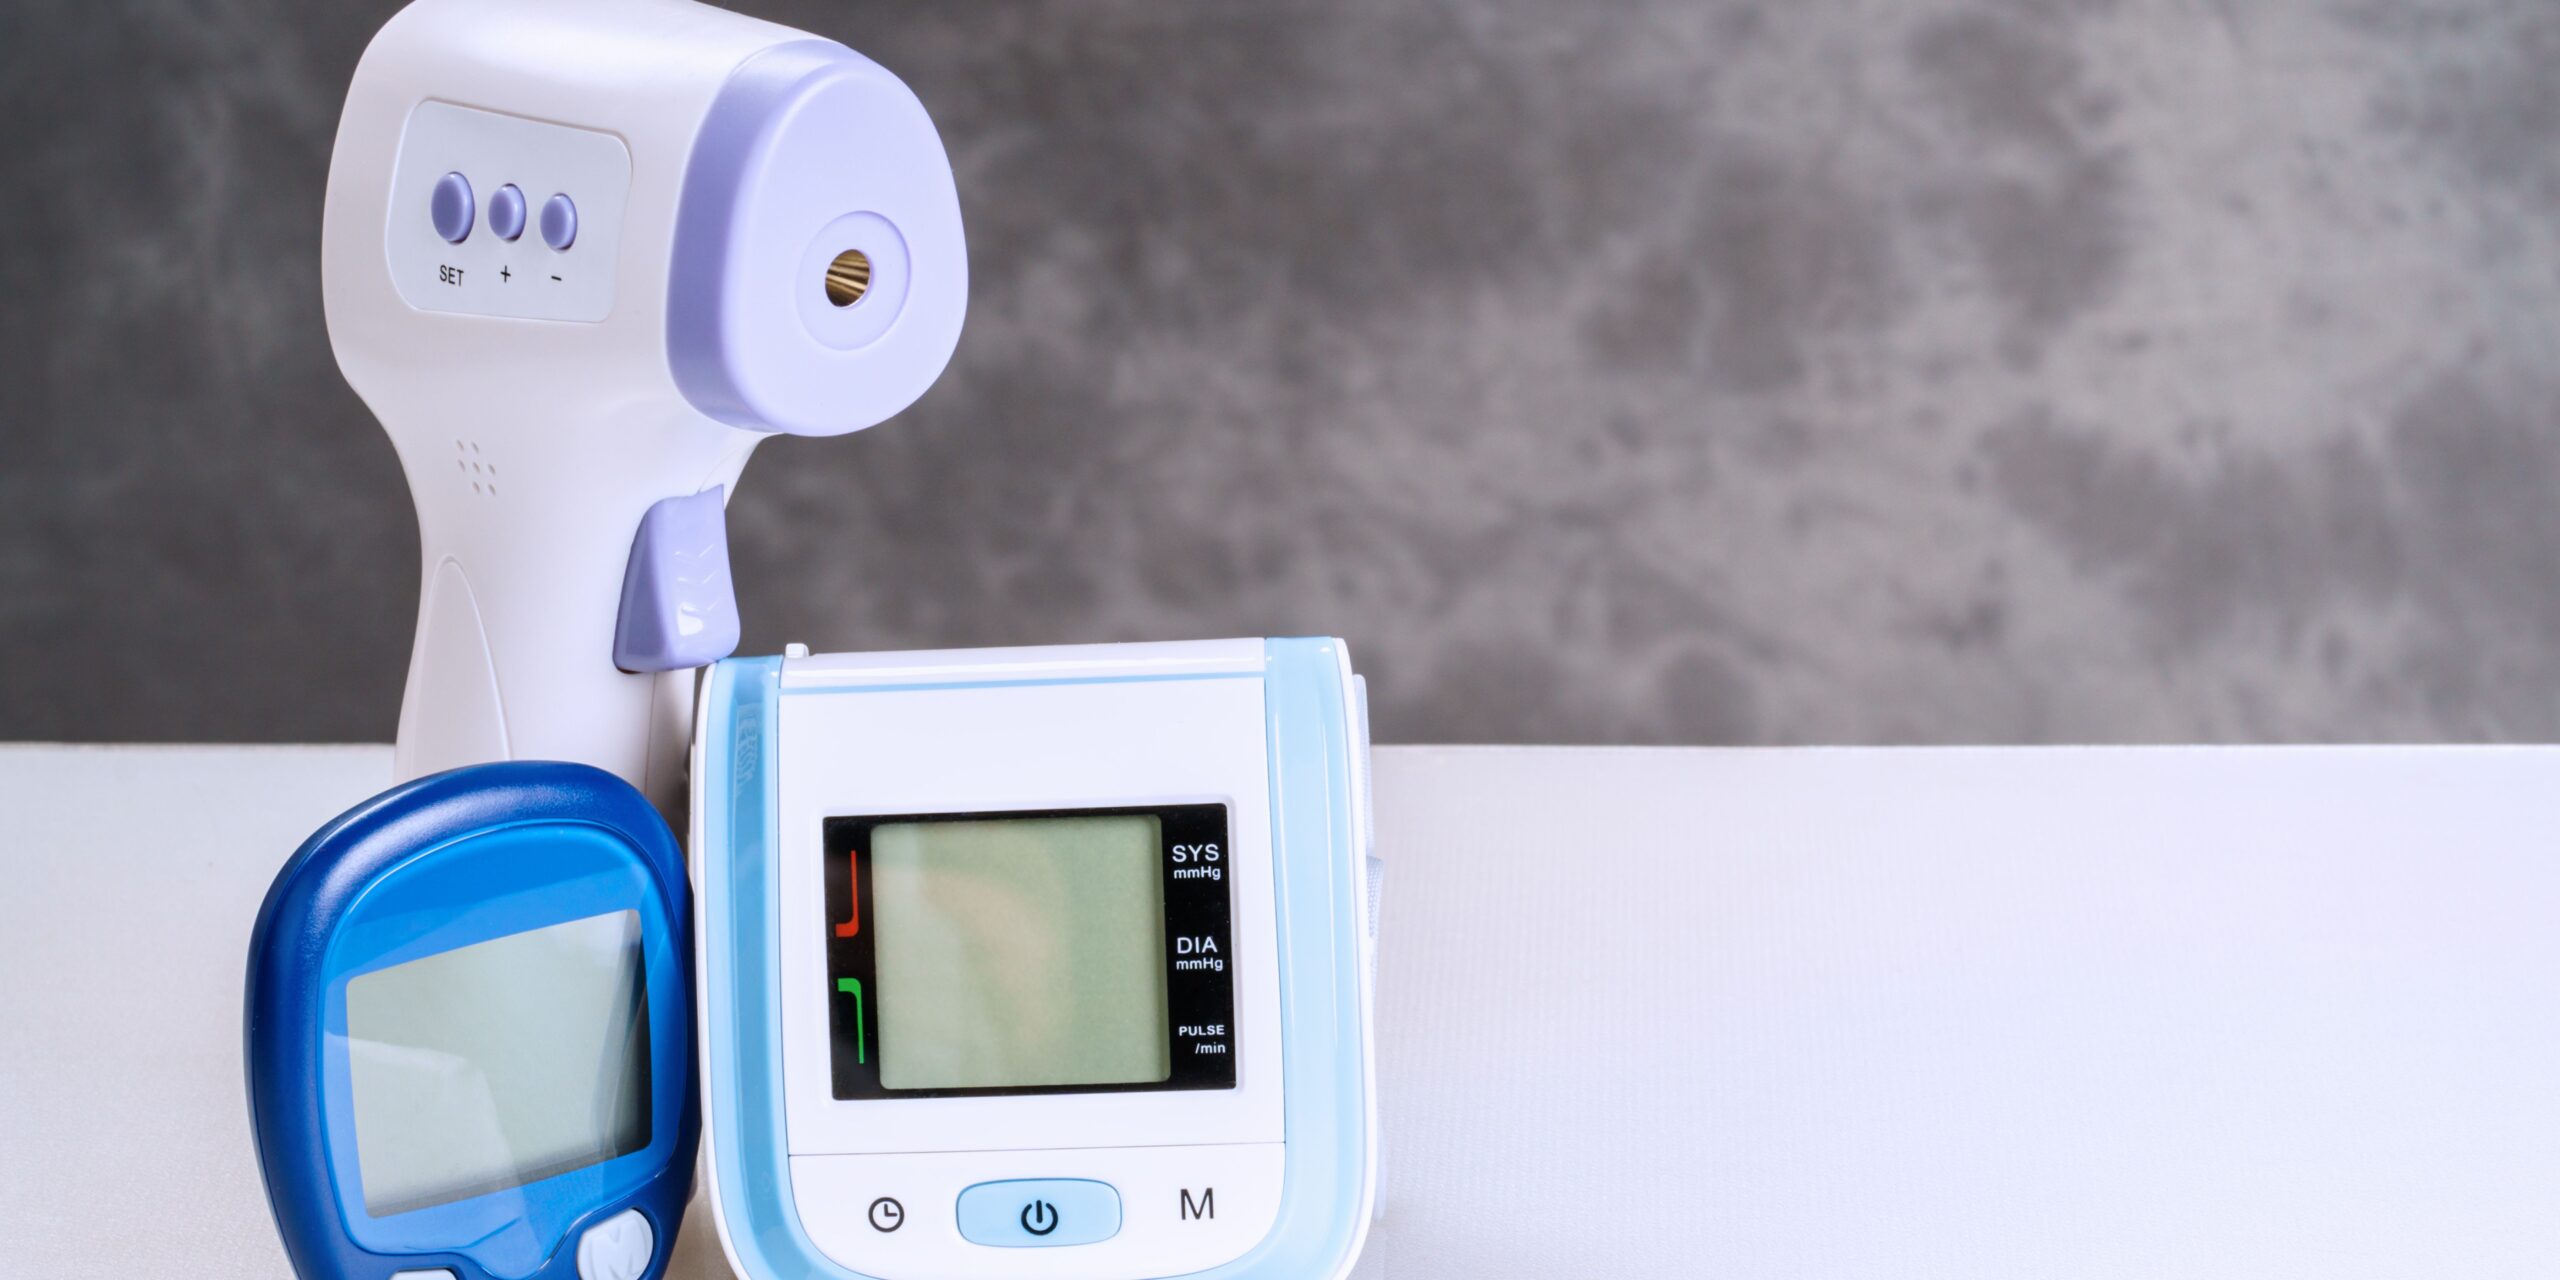 Innovative Medical Device Technology Helps Homeowners Improve Health and Home